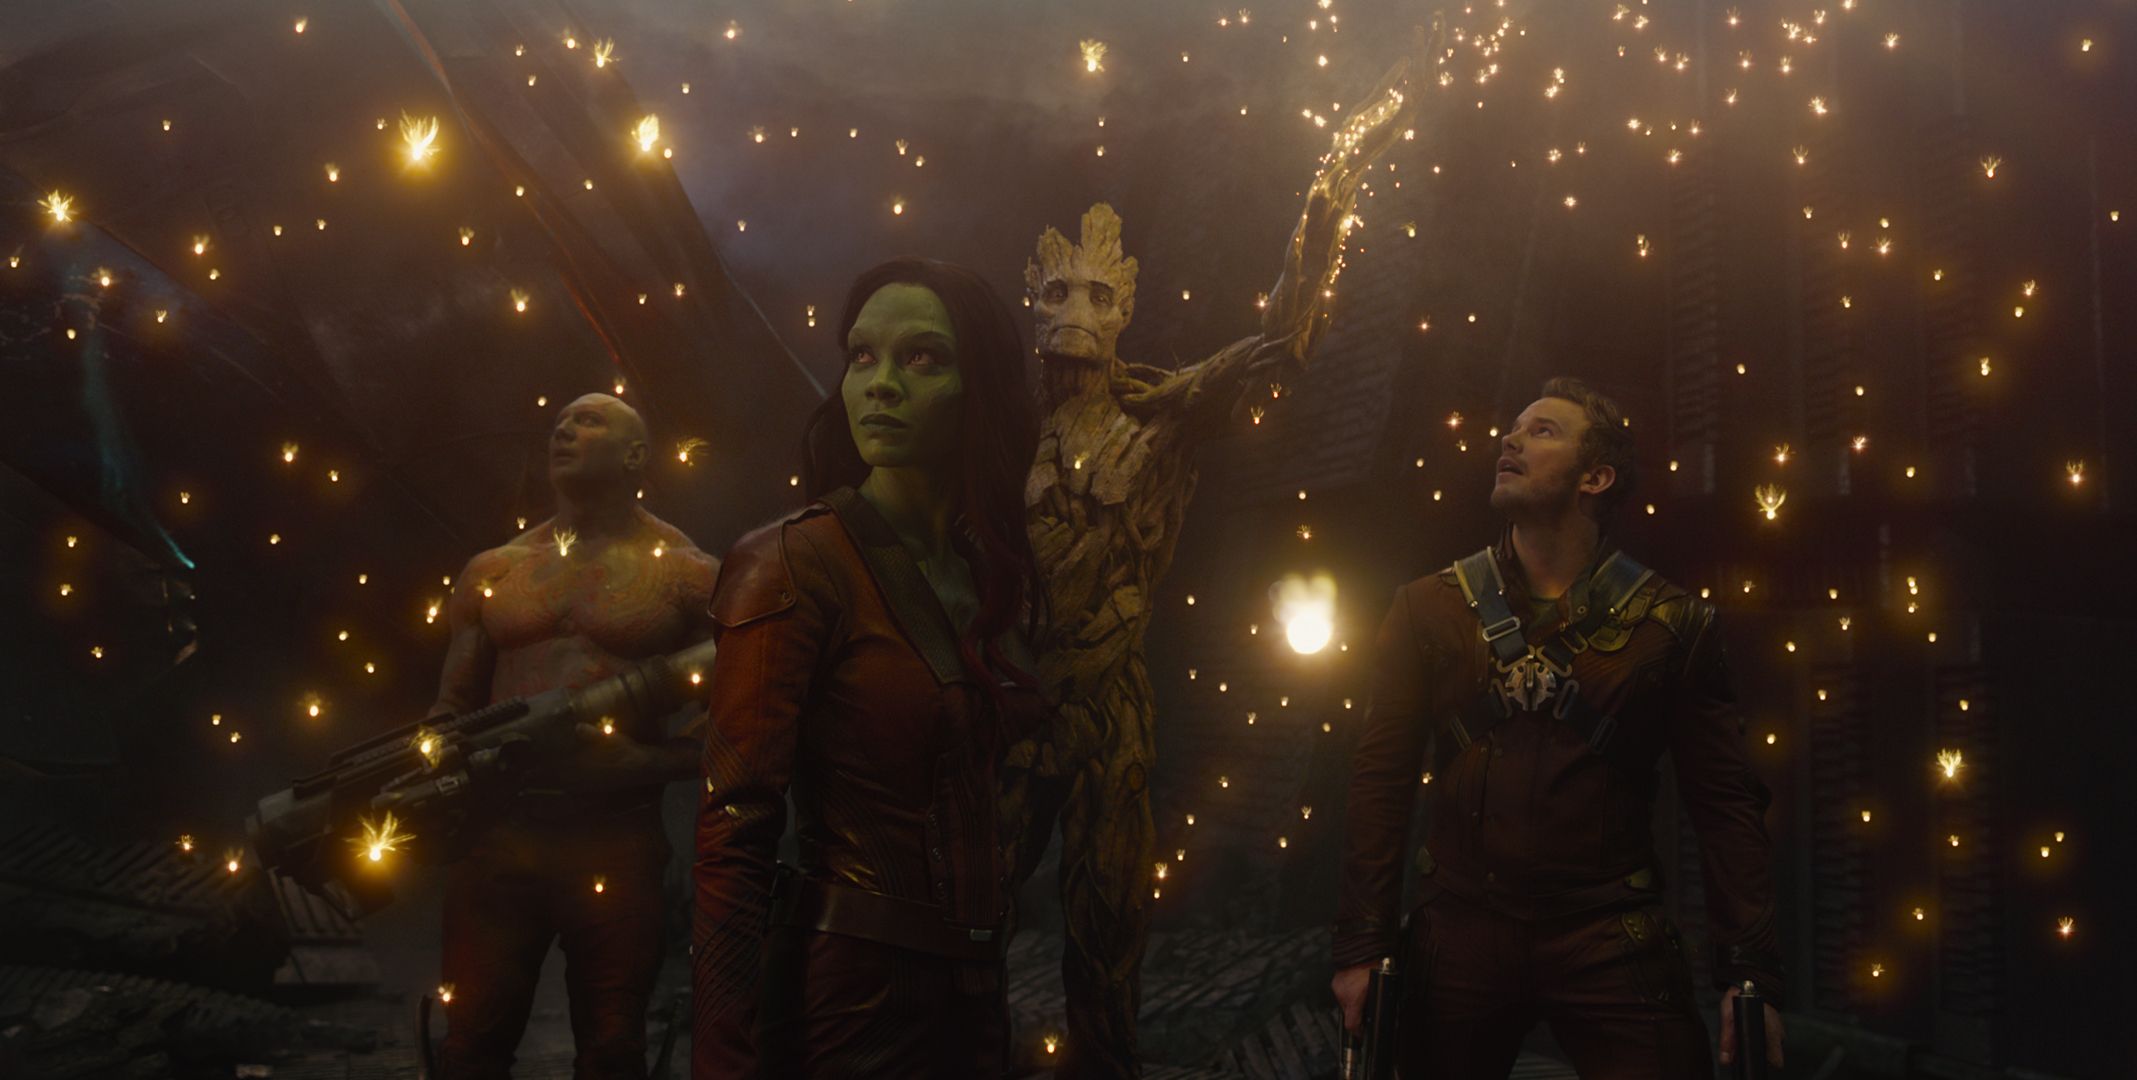 guardians-of-the-galaxy-movie-image